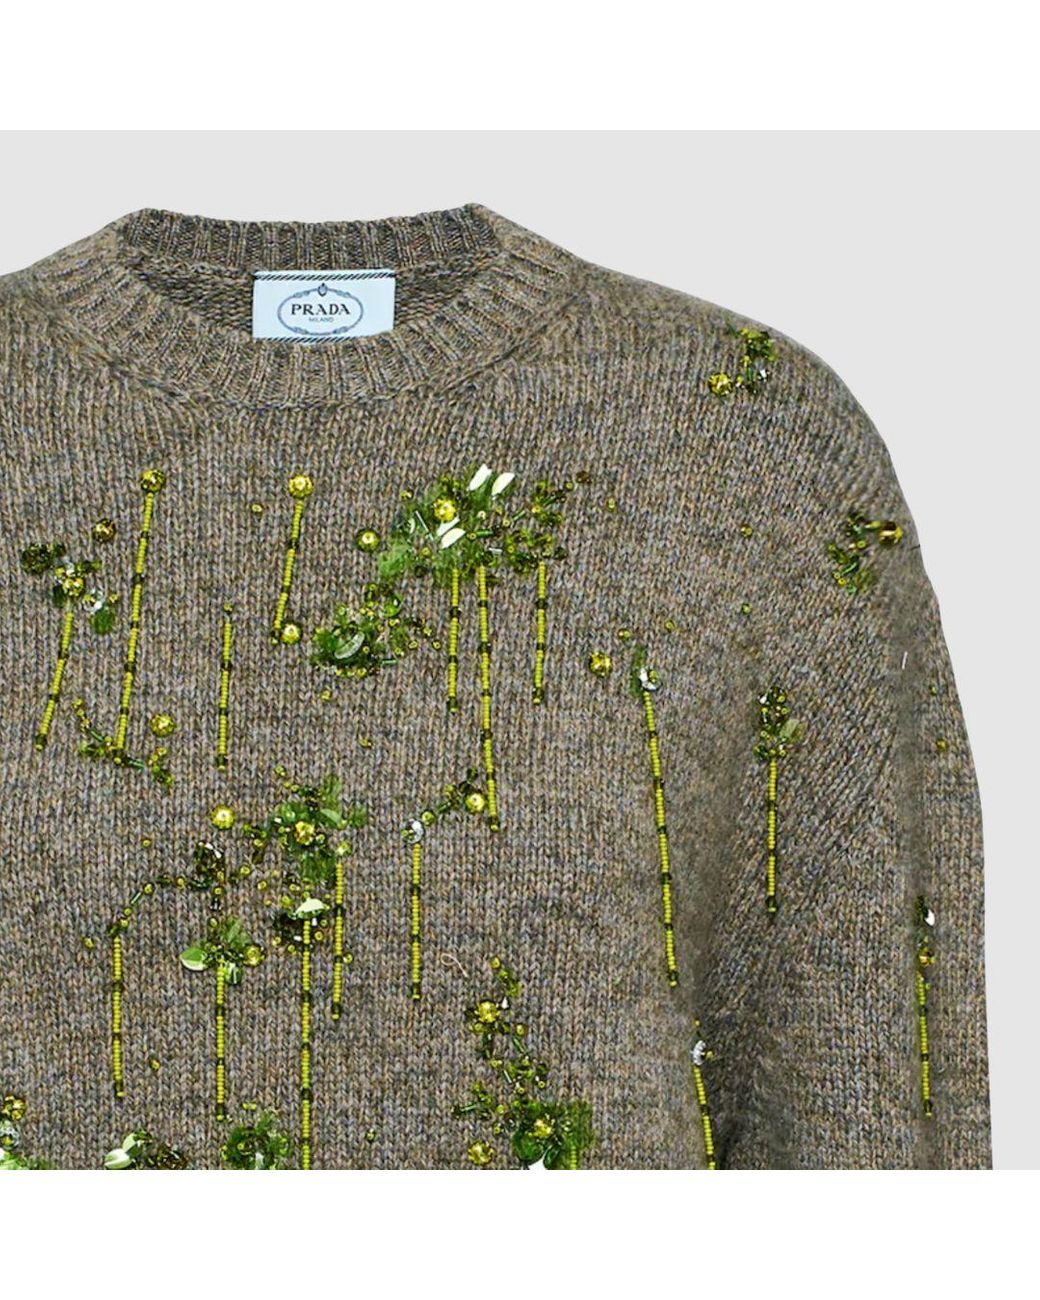 Prada Embroidered Wool & Cashmere Sweater in Green | Lyst